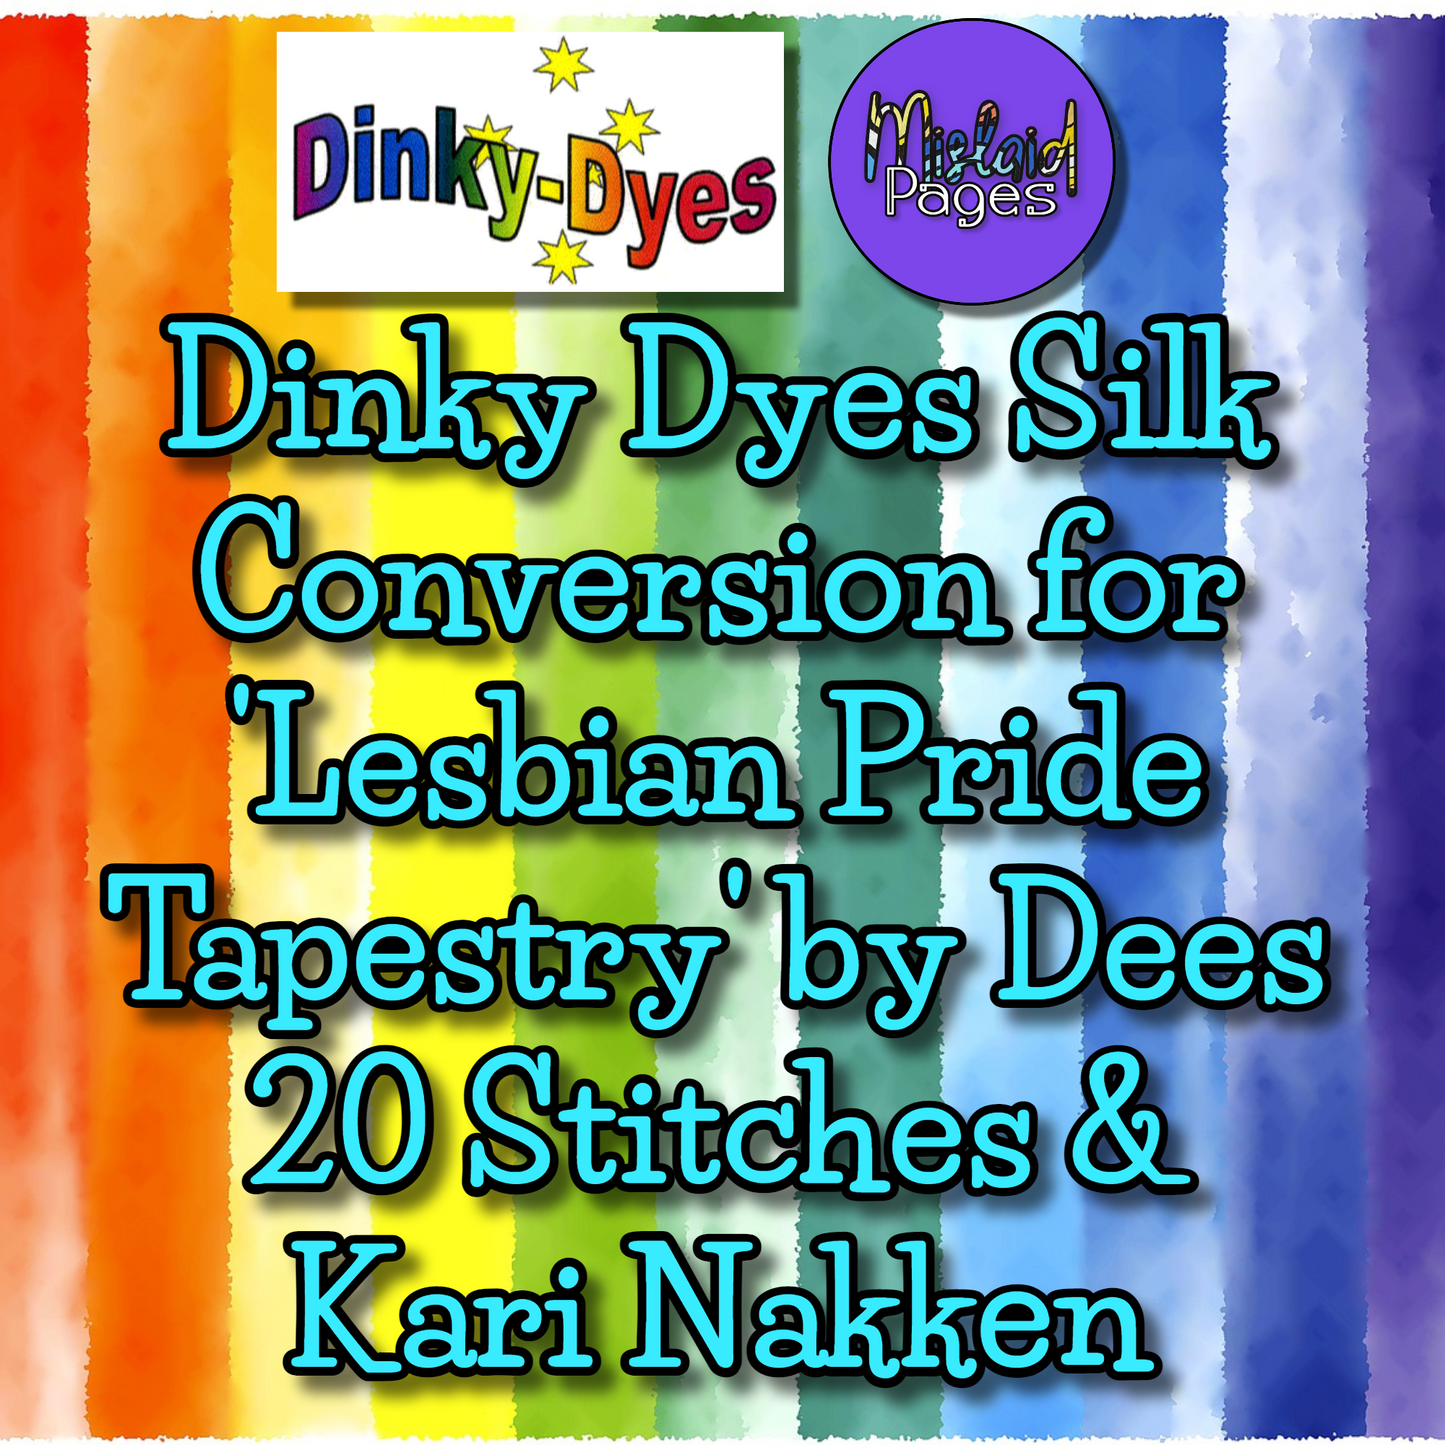 Dinky Dyes Silk Pack - Conversion for 'Lesbian Pride Tapestry'